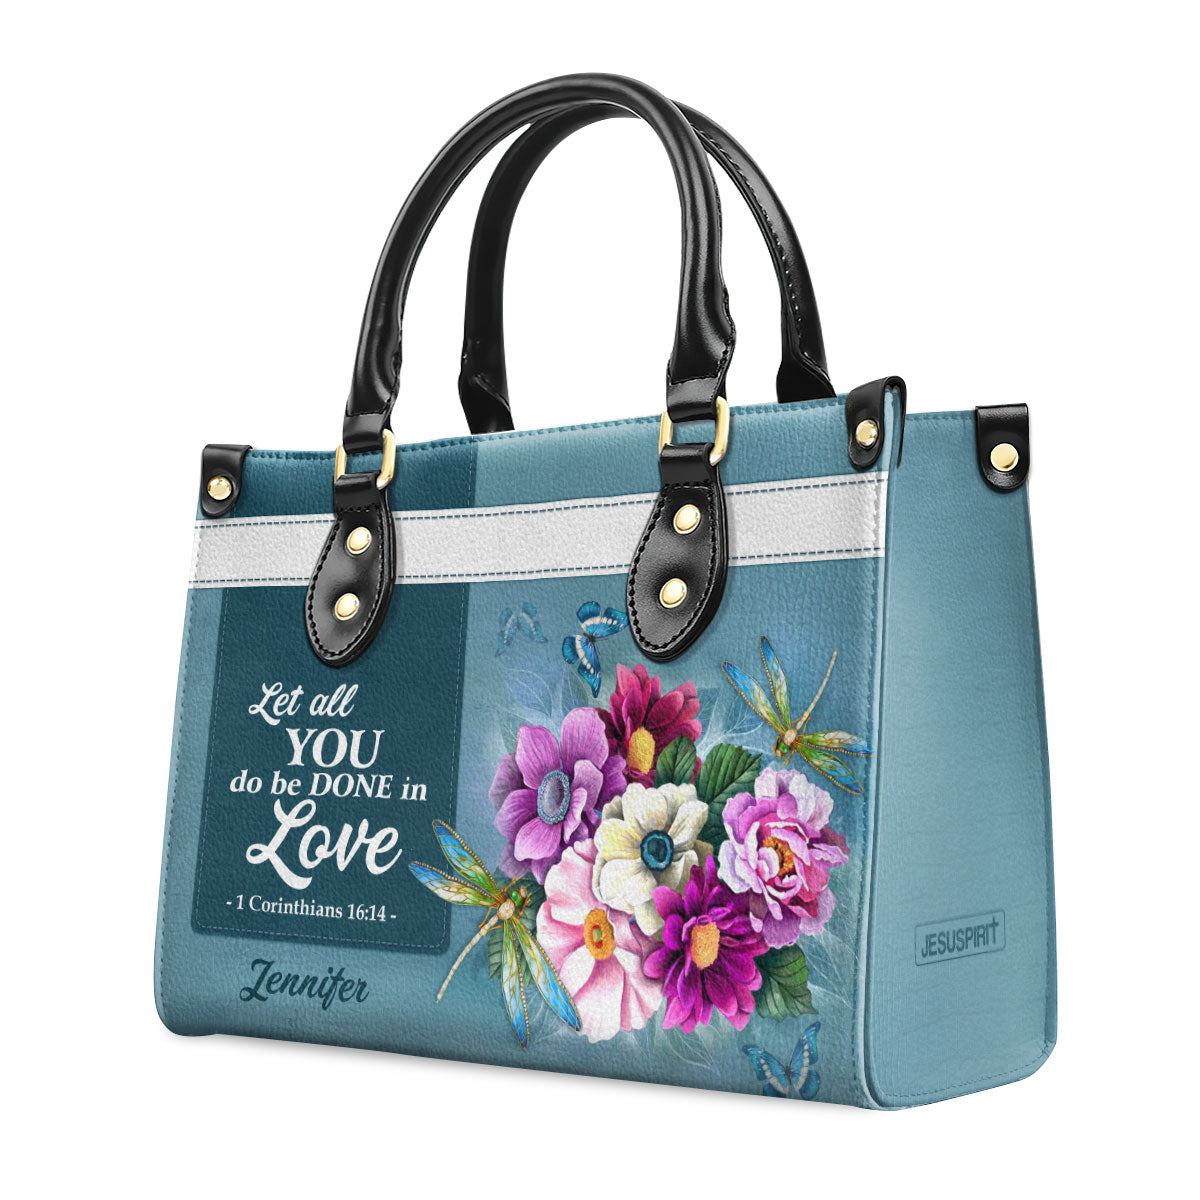 Jesuspirit | 1 Corinthians 16:14 | Let All That You Do Be Done In Love | Christian Valentines Day Ideas For Women | Personalized Leather Handbag With Handle LHBH829